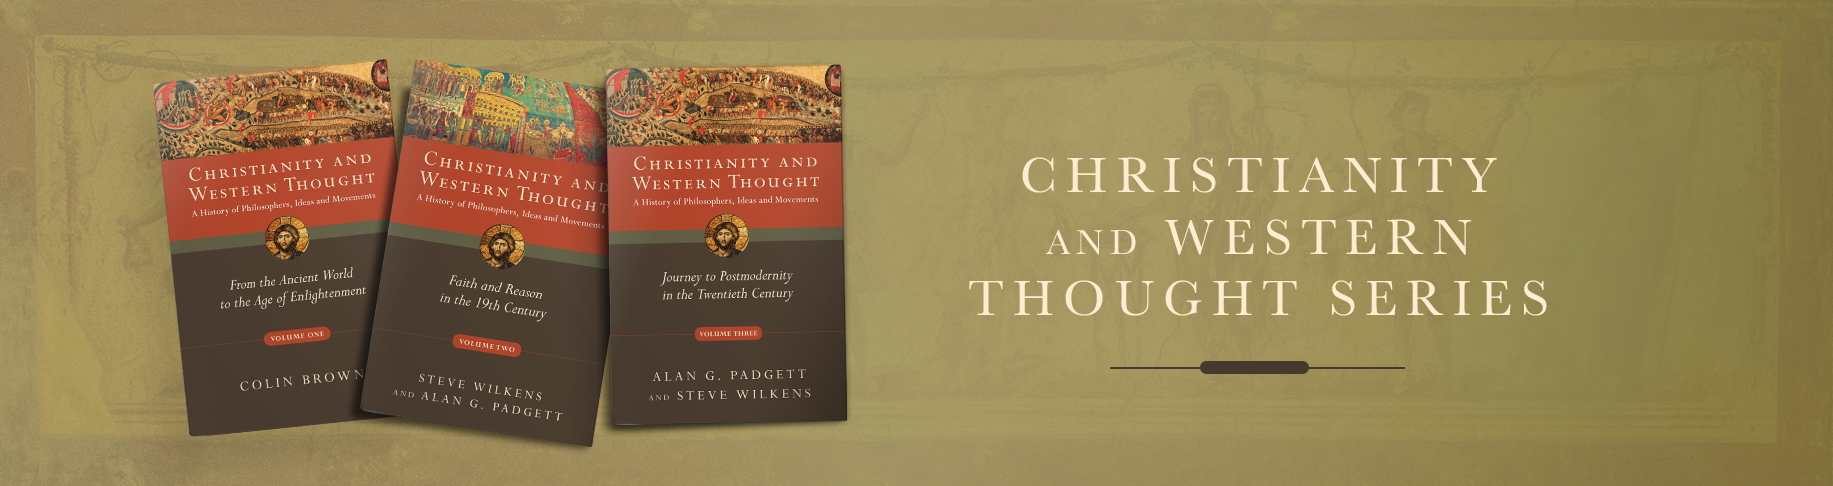 Christianity and Western Thought Series